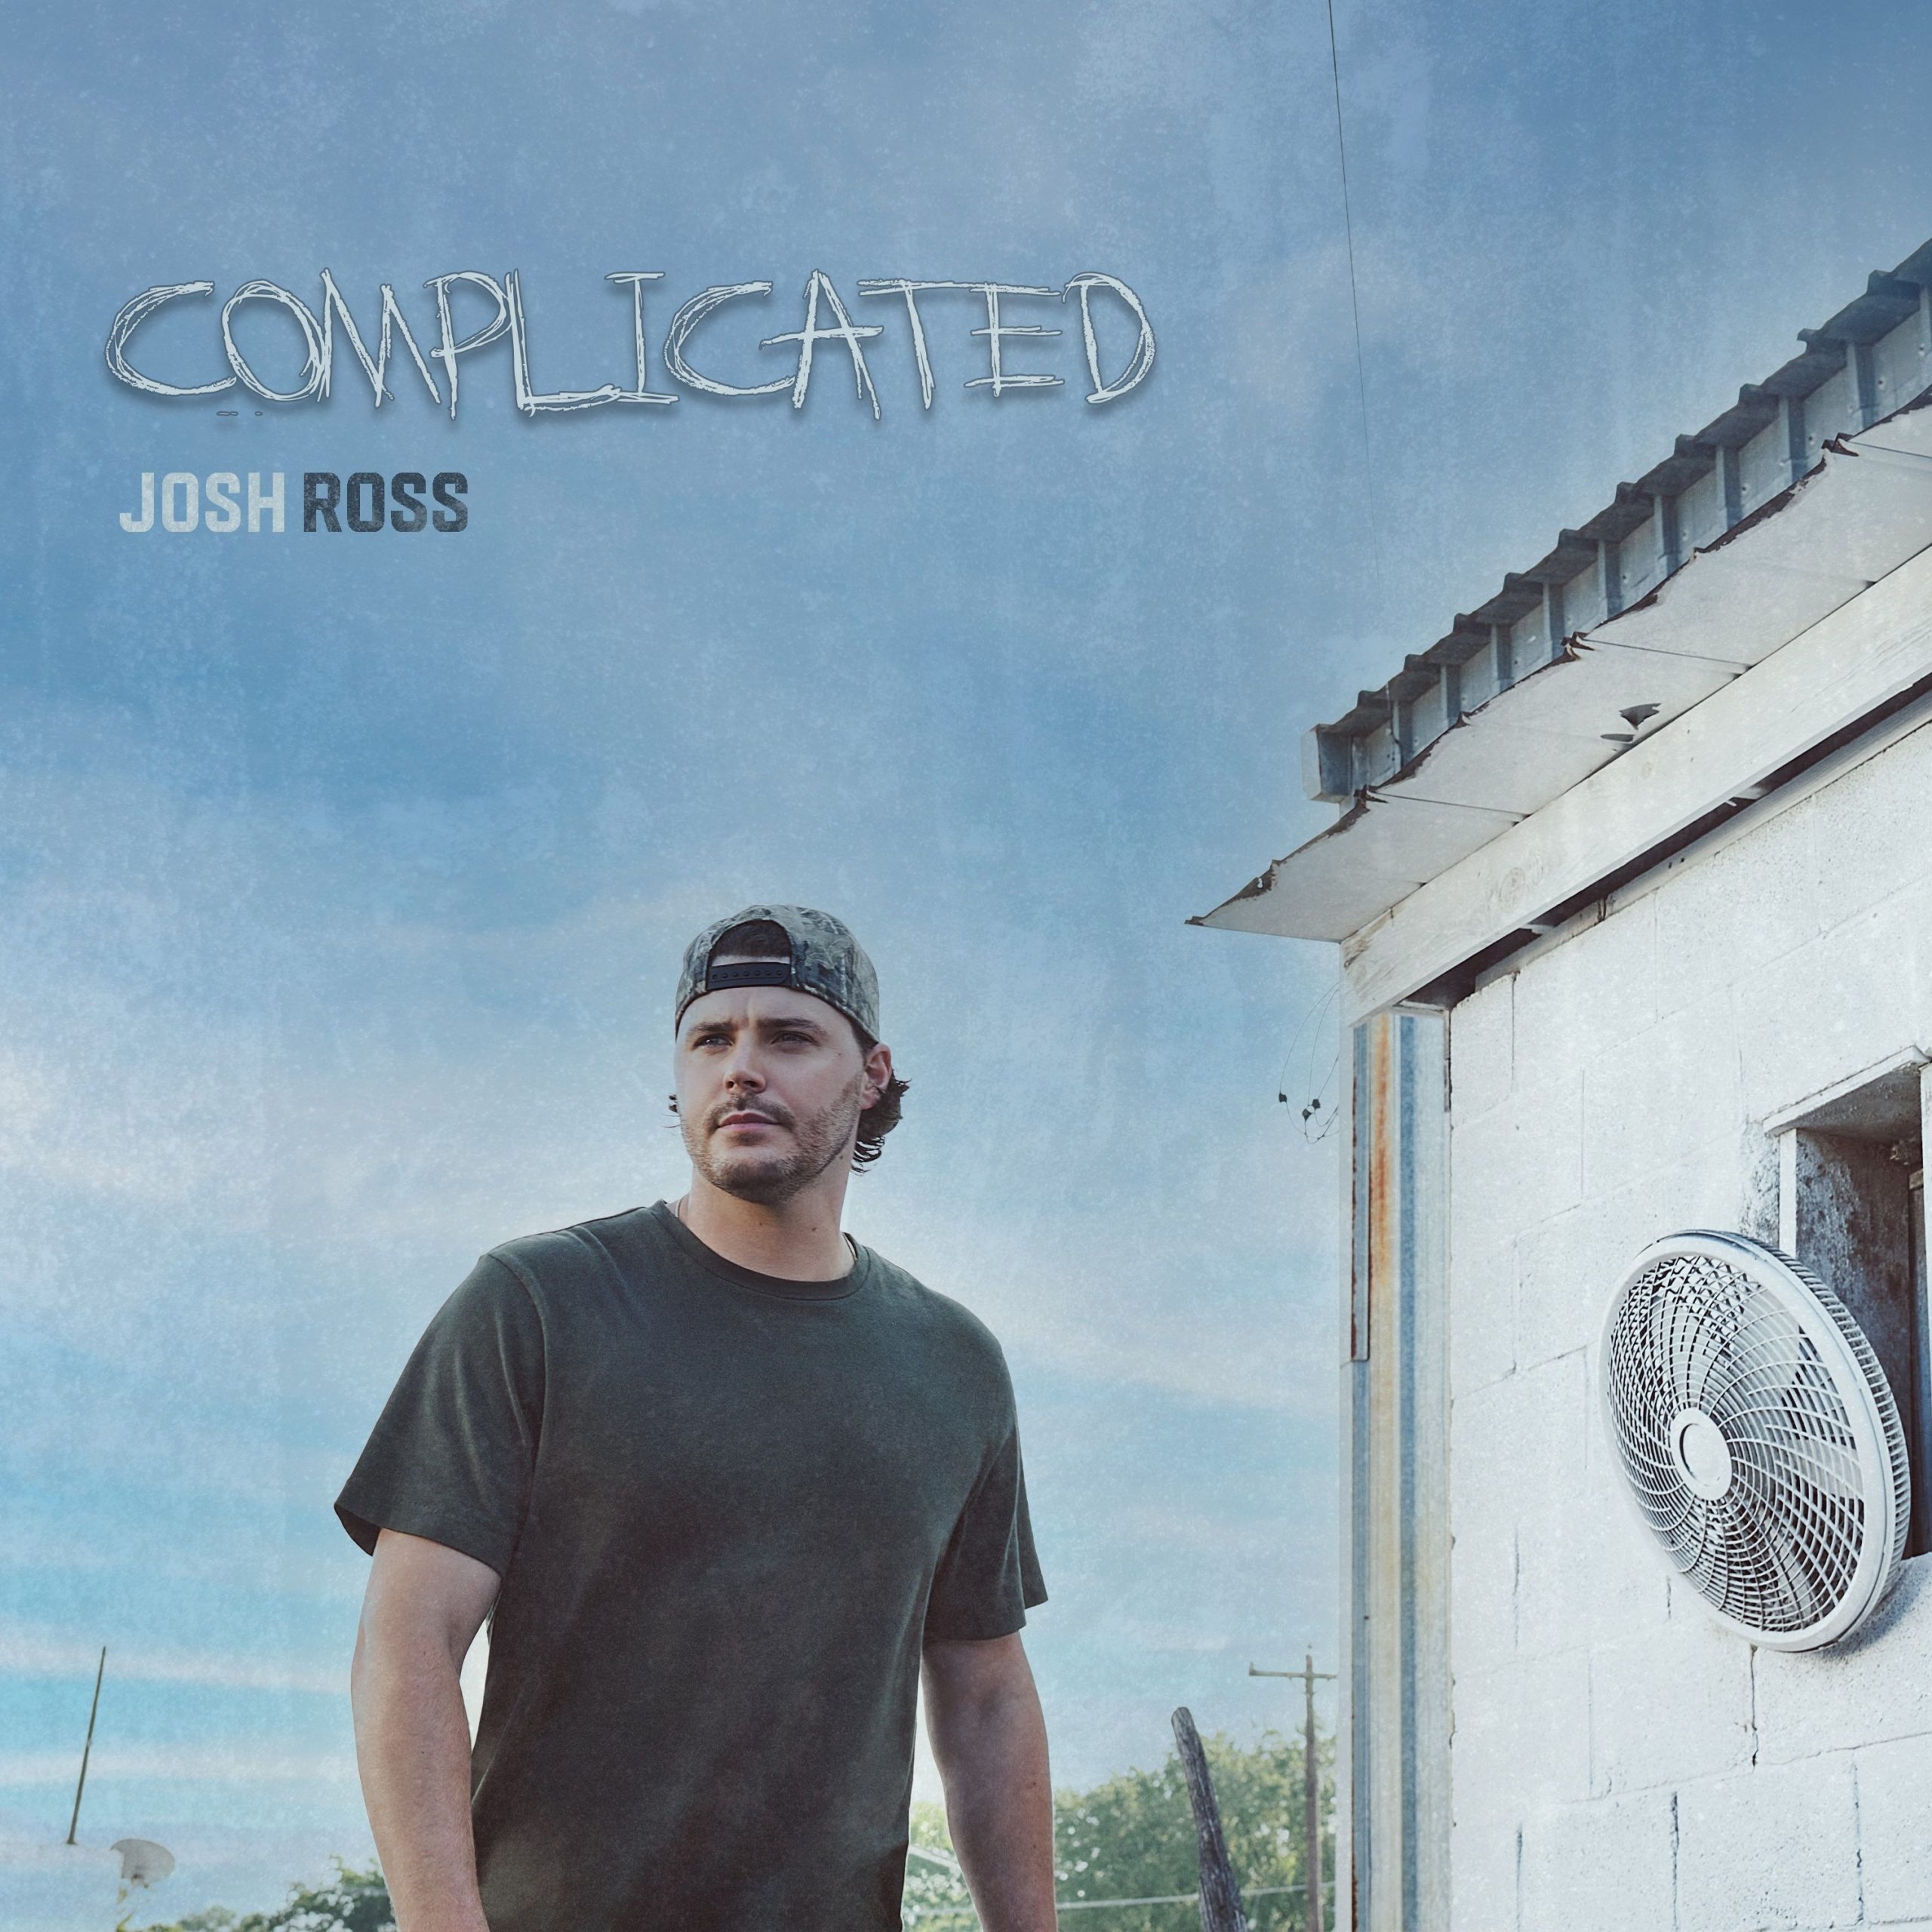 JOSH ROSS RELEASES NEW EP, ‘COMPLICATED’, AVAILABLE NOW